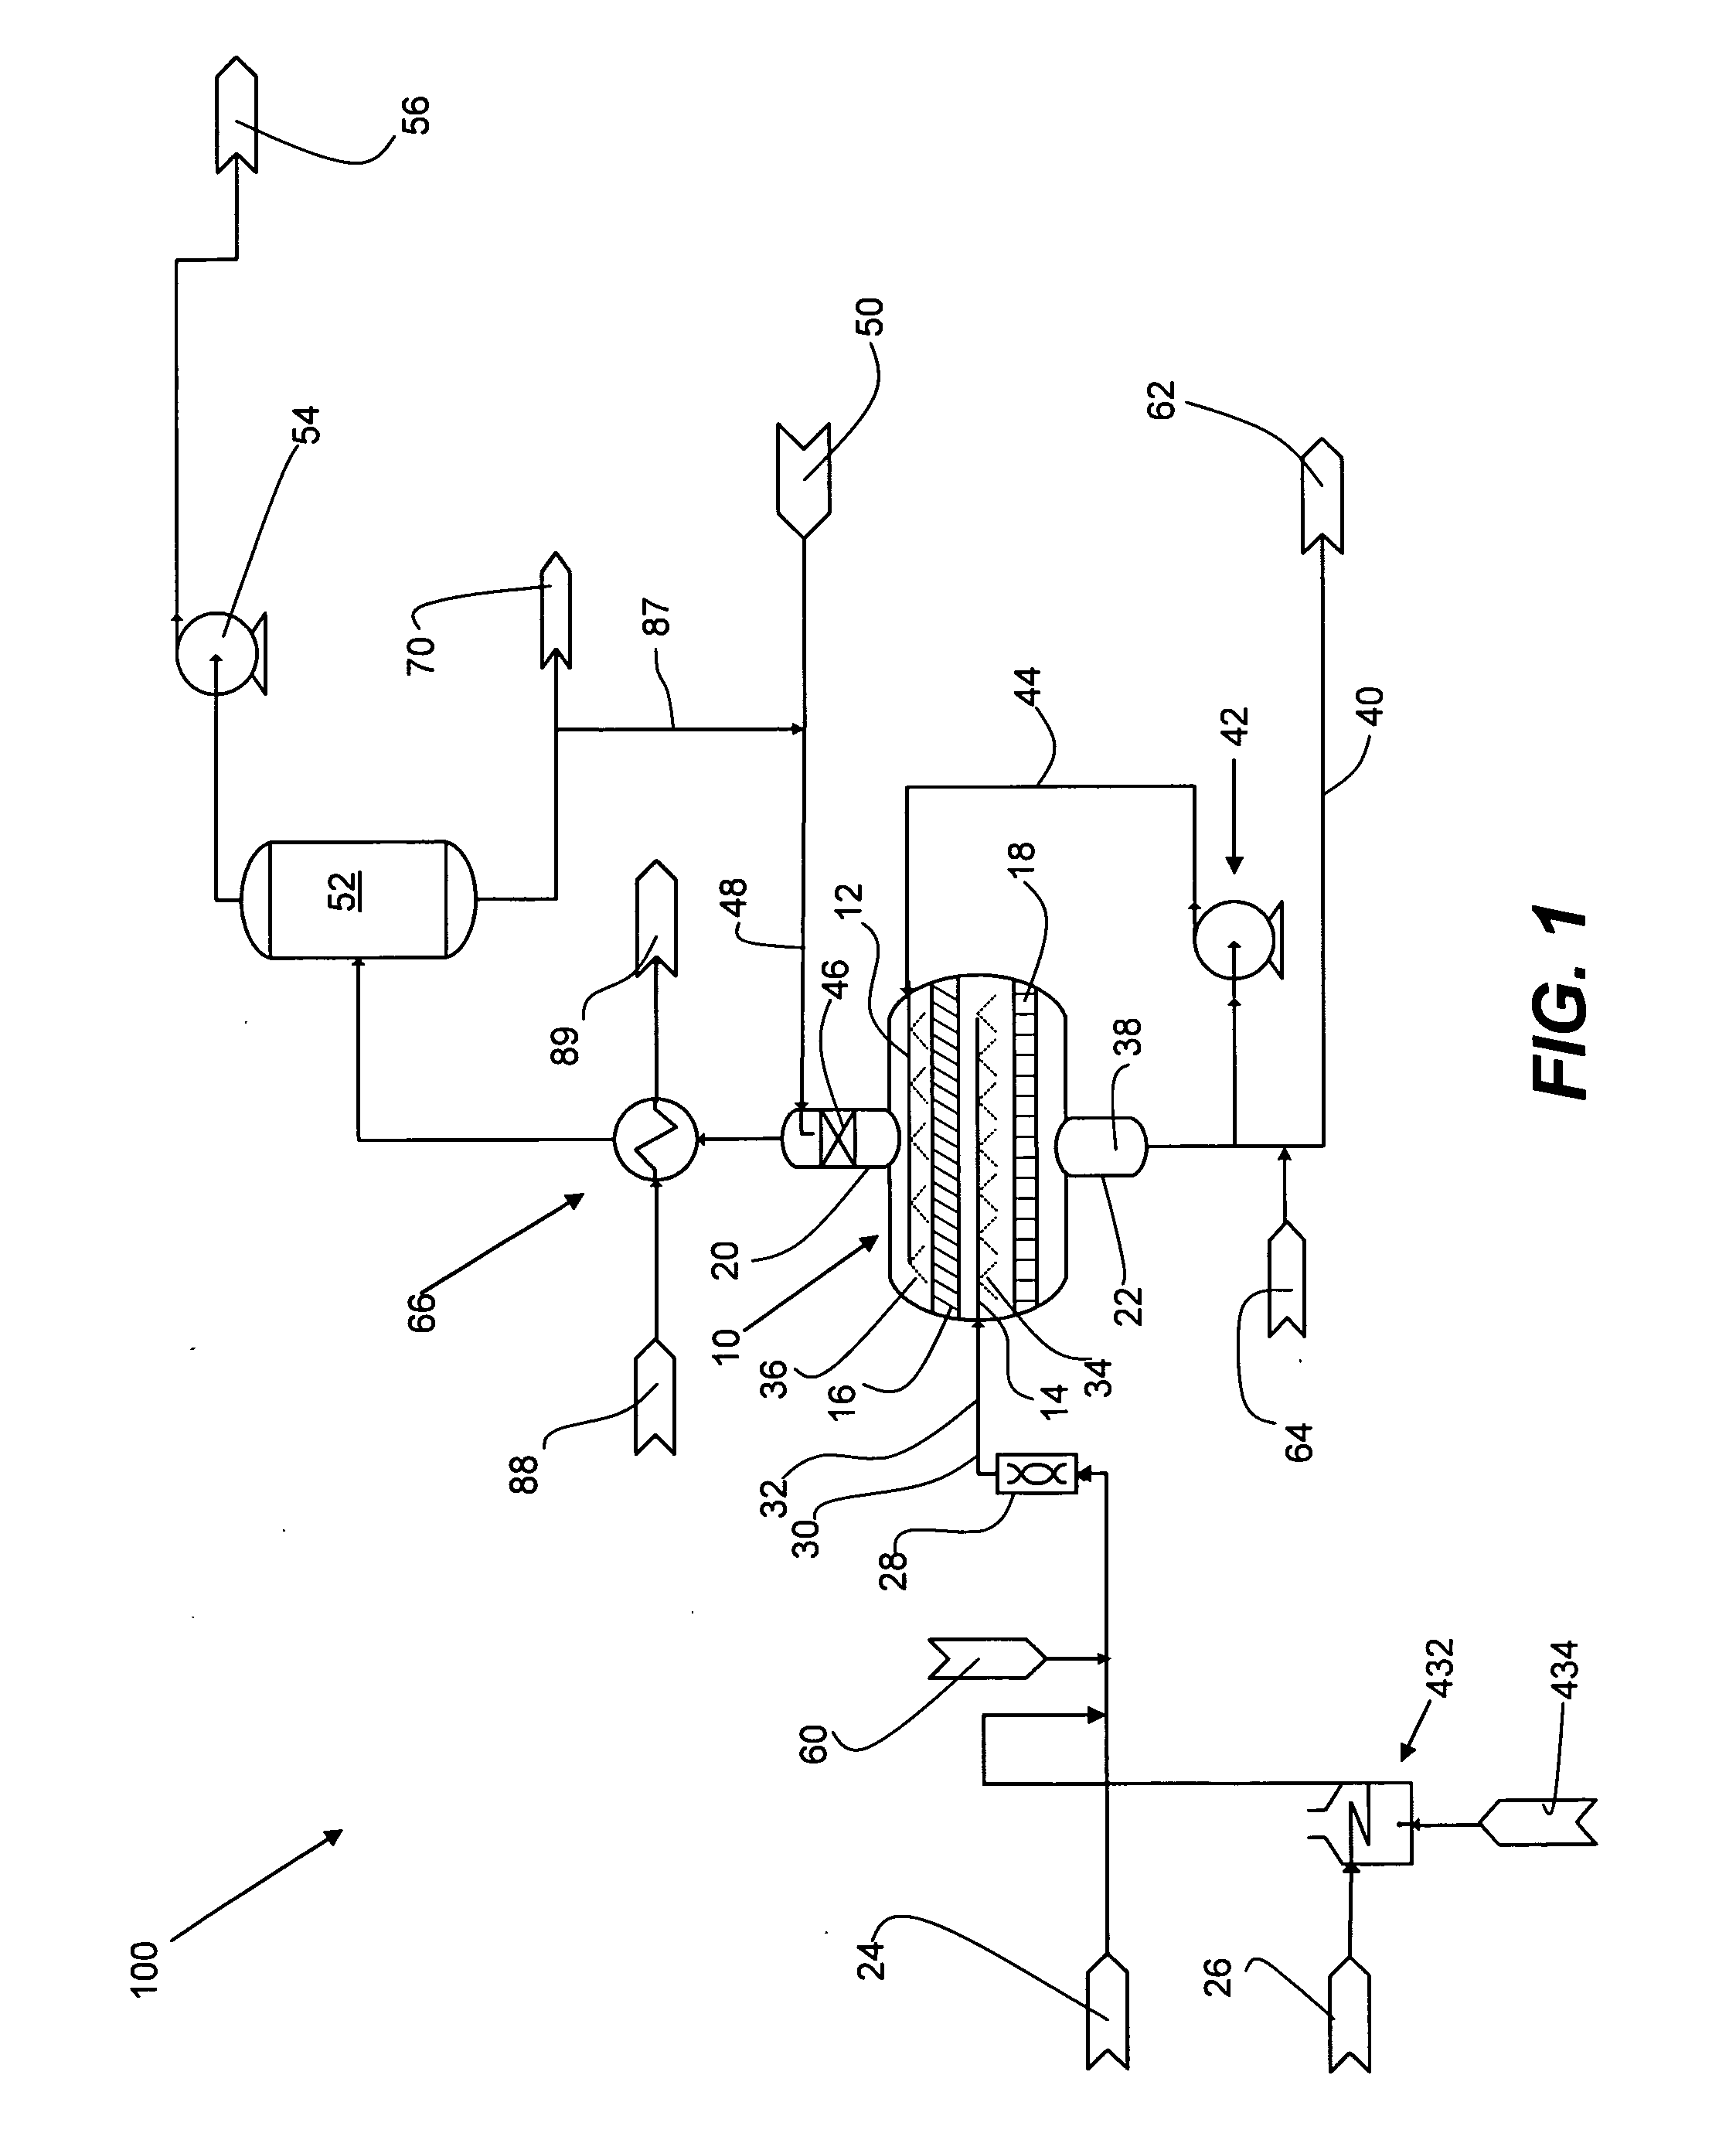 Process and apparatus for removal of oxygen from seawater